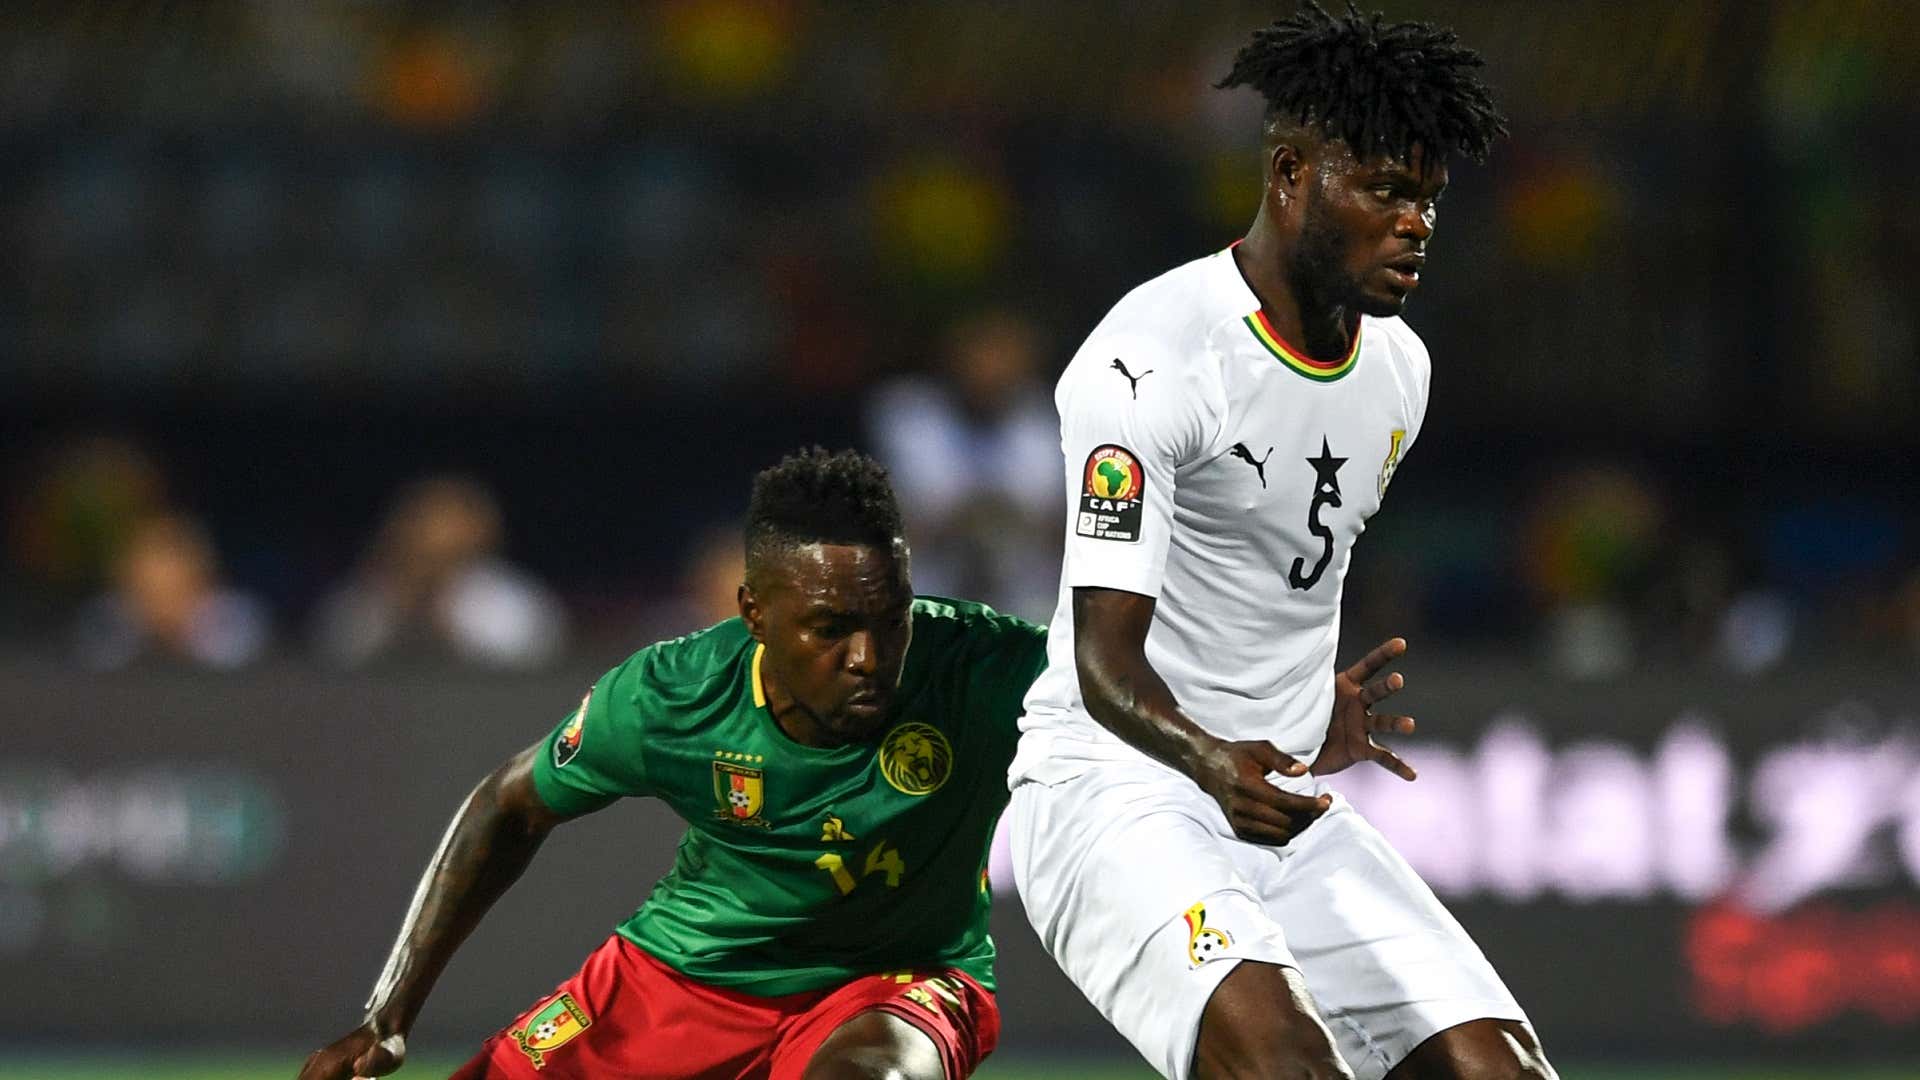 Cameroon's midfielder Georges Mandjeck vies for the ball with Ghana's midfielder Thomas Partey during the 2019 Africa Cup of Nations